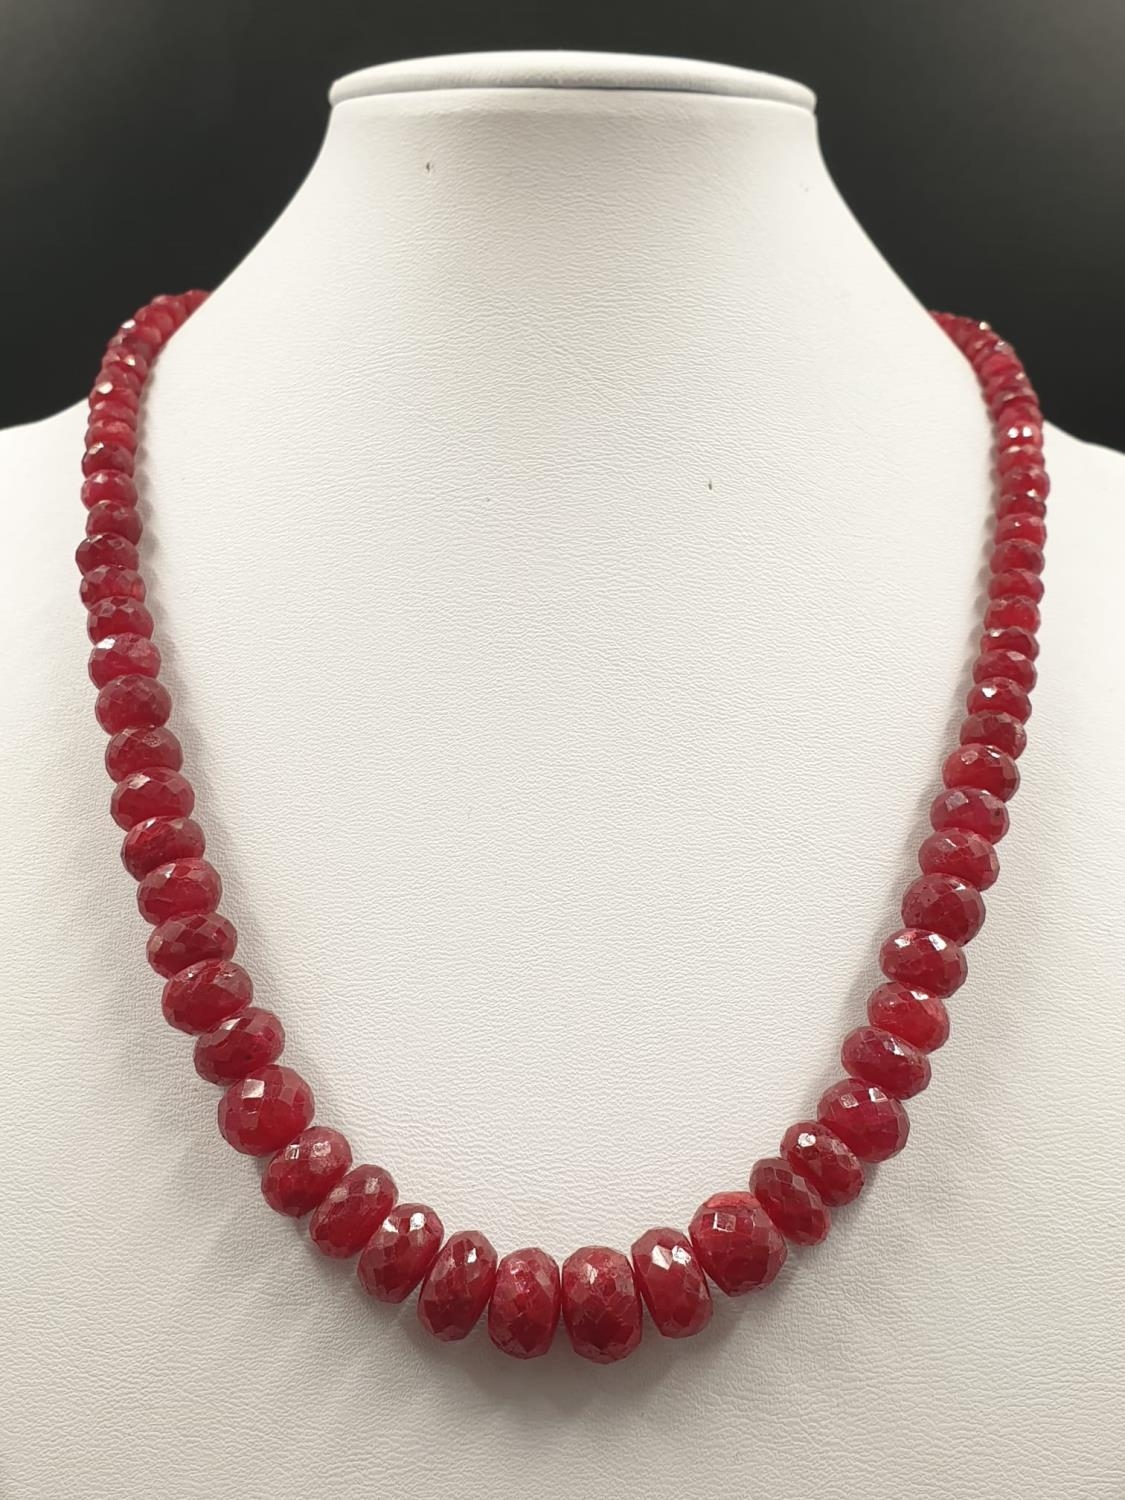 A 220cts single row Africa ruby necklace with a sterling silver ruby and peridot gemstone clasp 47cm - Image 2 of 7